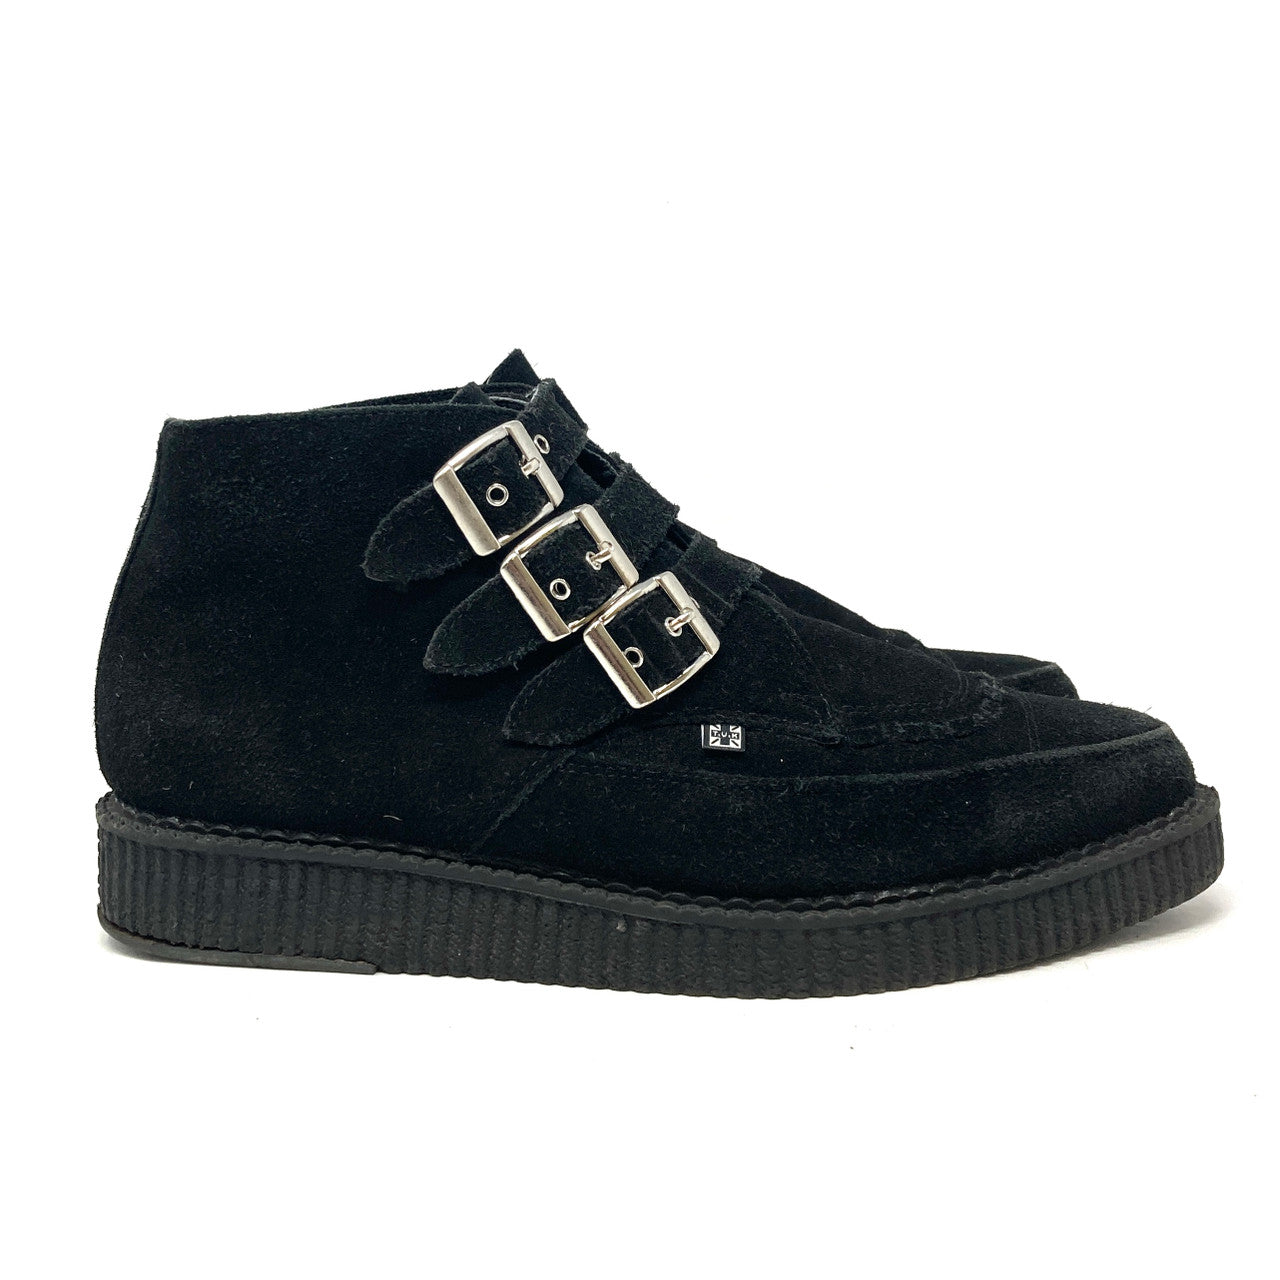 Tuk High Top Creepers- Right